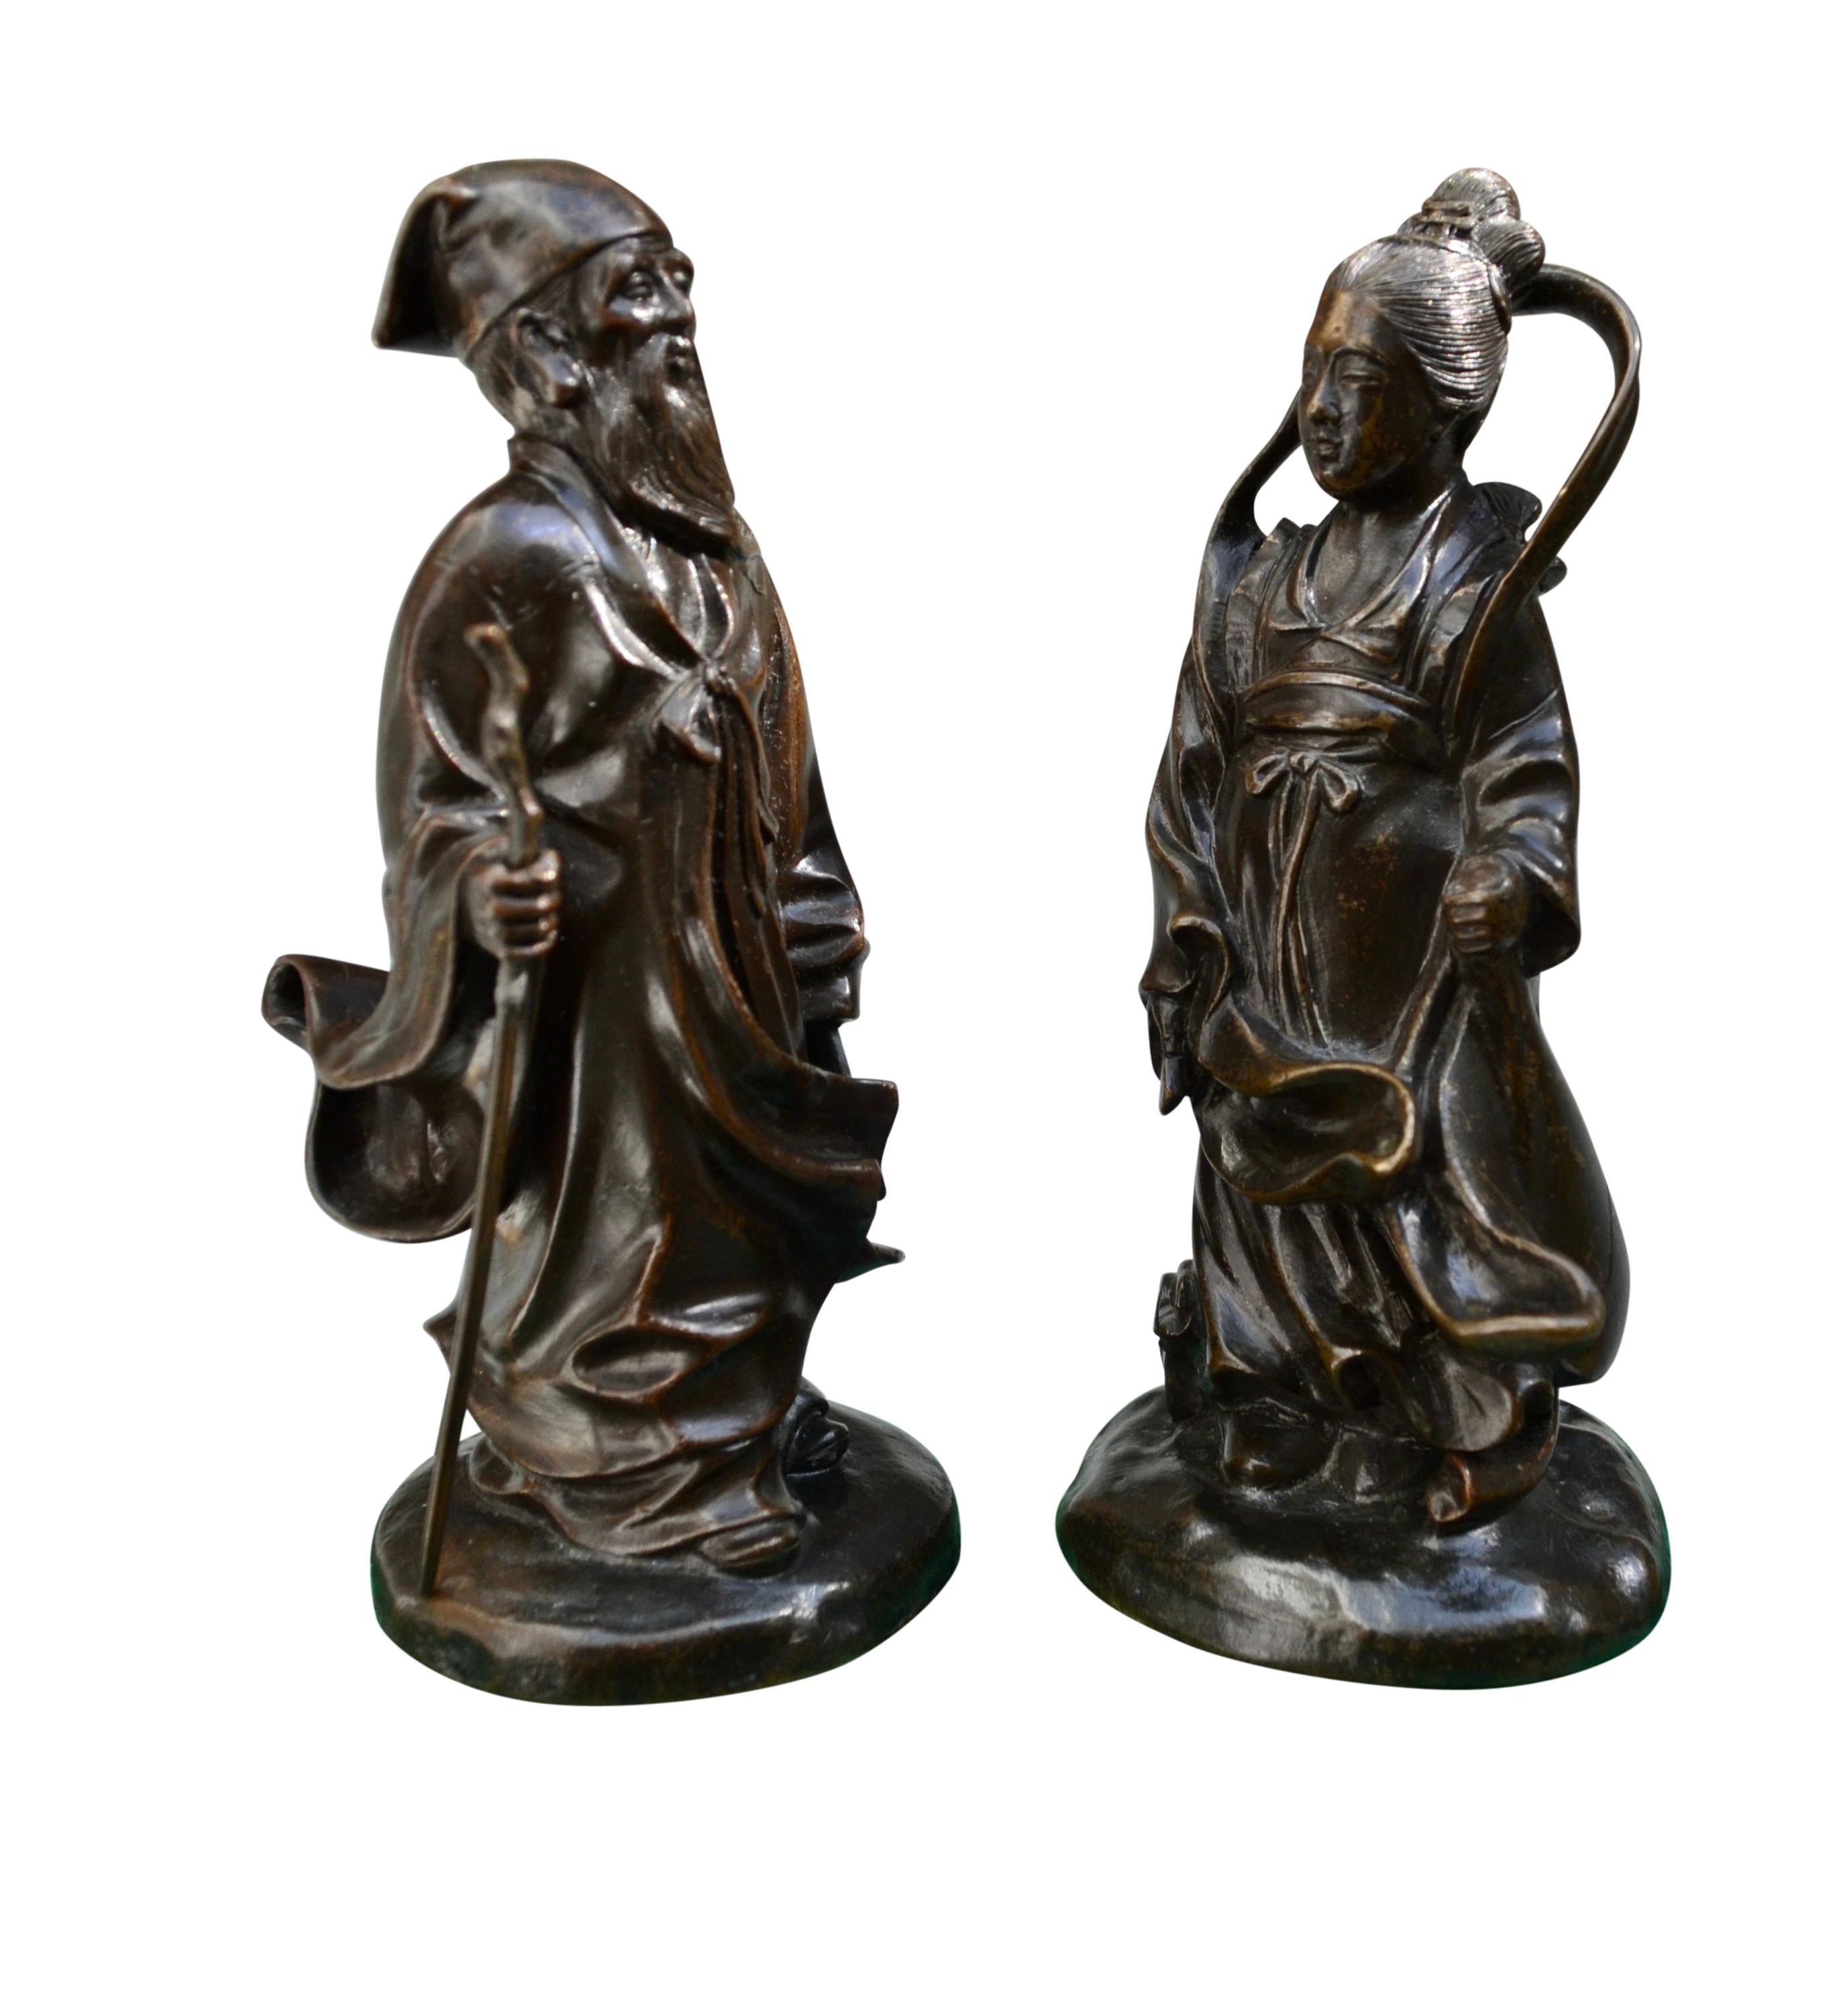 A pair of exceptional small patinated bronze castings of a male and female Chinese Deities or Gods possibly representing Shouxing God of Longevity Immortality and Good Fortune, and Guan Yin Goddess of Mercy.  Given the rubbing in the patination and